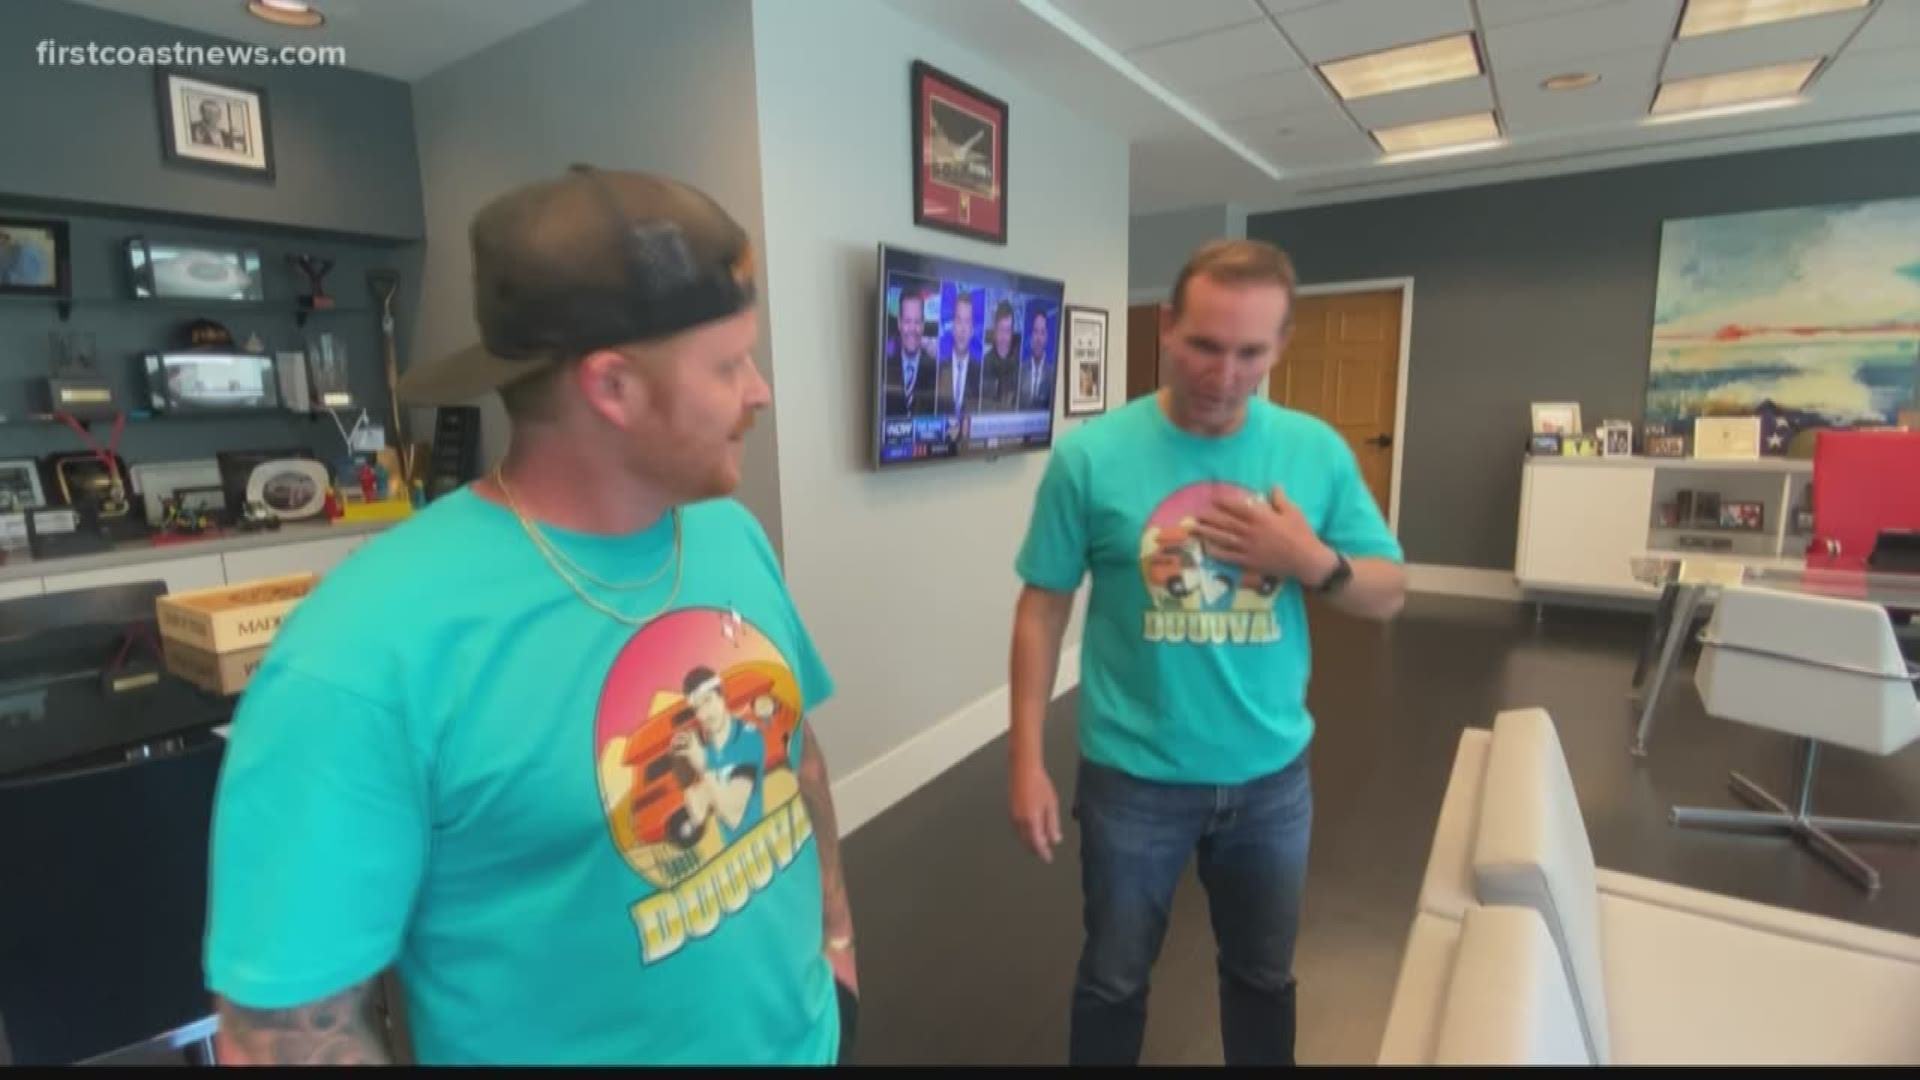 The viral t-shirt designed by Mark Braddock, owner of 8103 Clothing, even made its way into the Mayor's office with Lenny Curry donning a shirt himself.